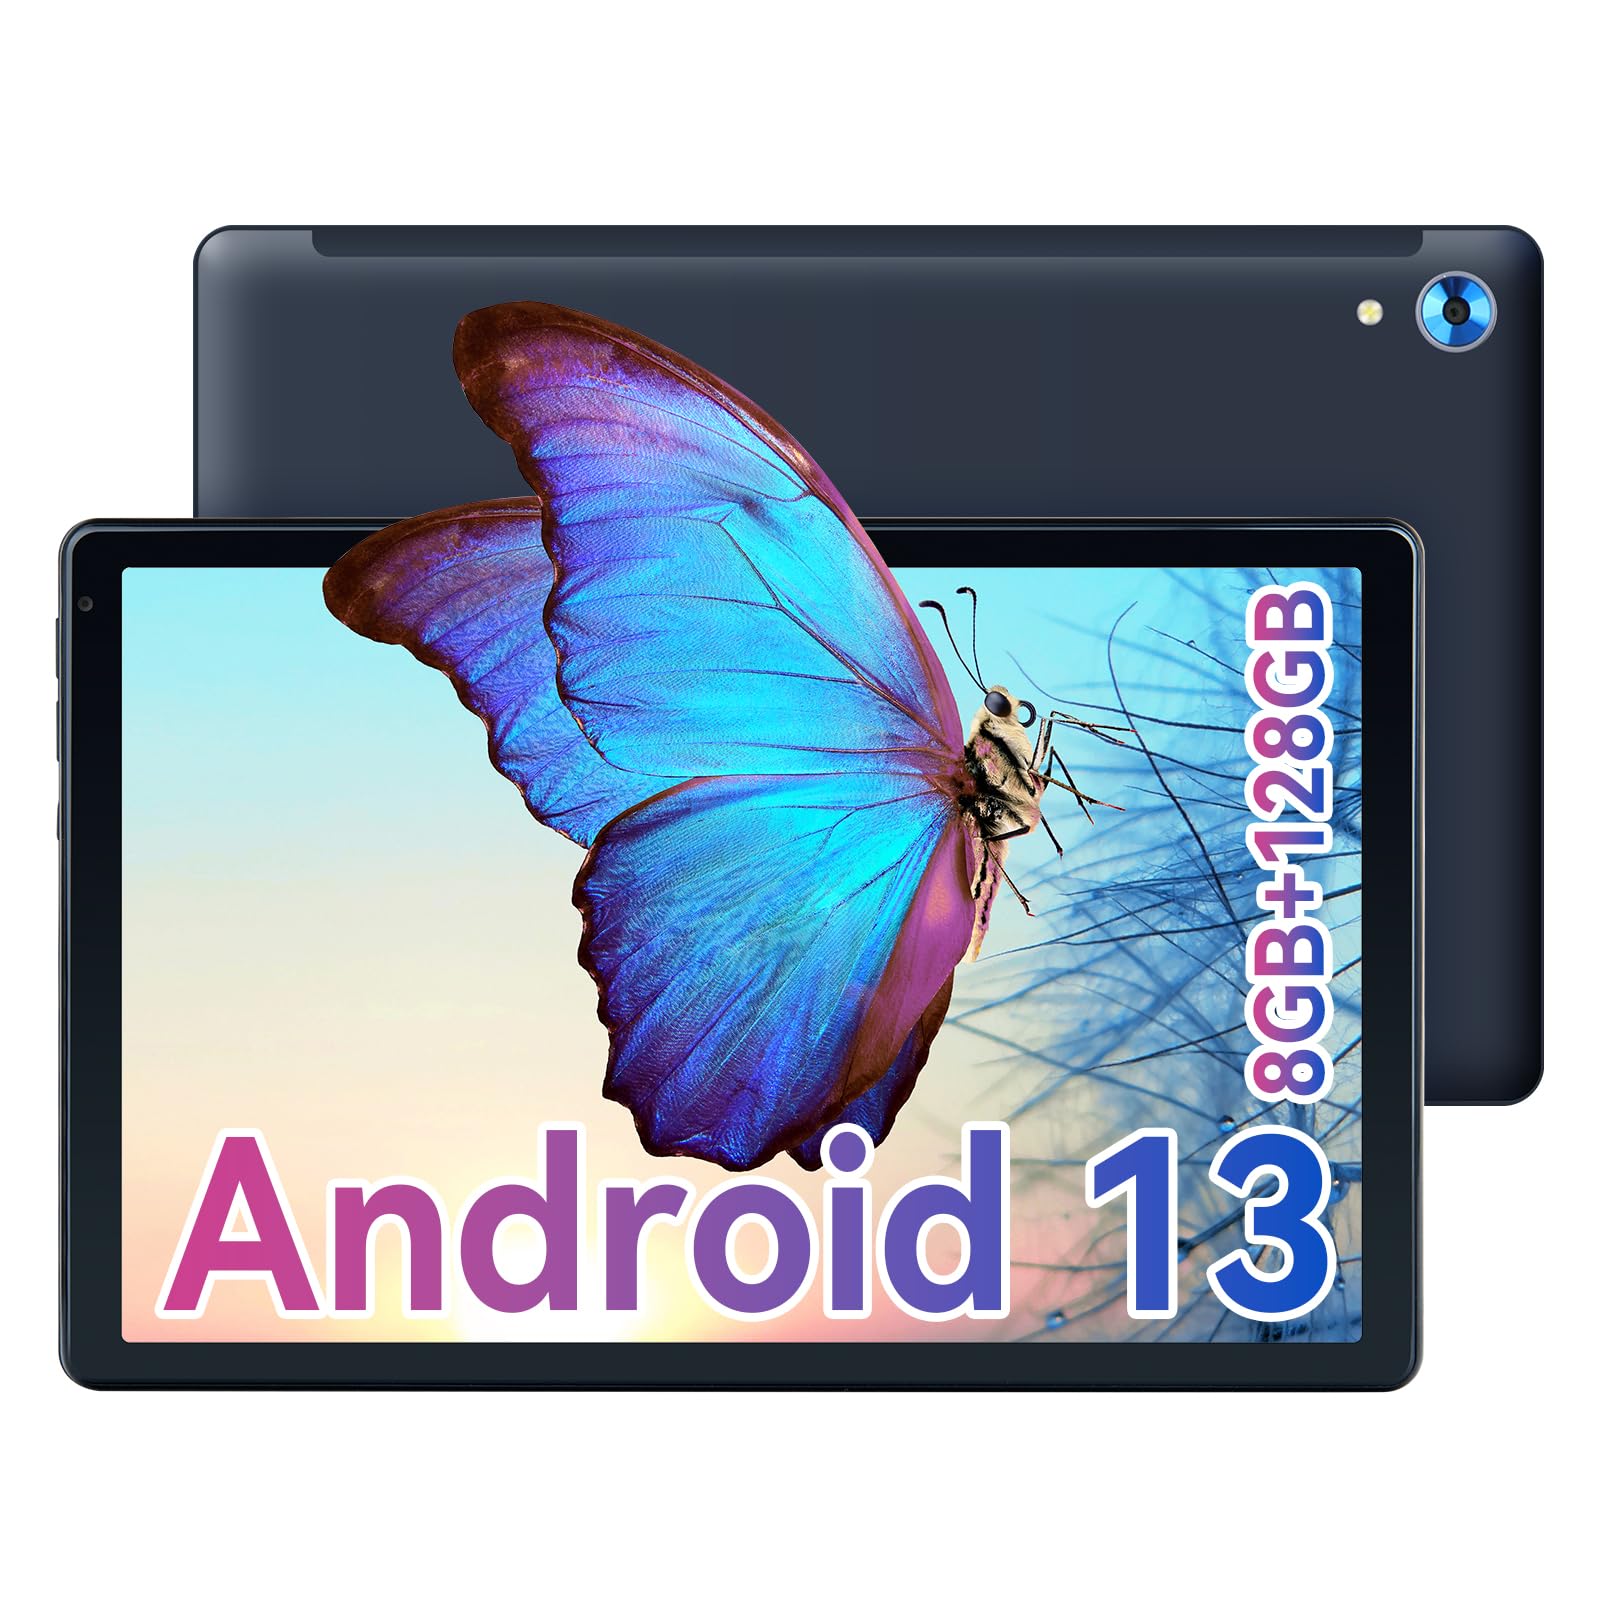 Buy Lville Android 13 Tablet, Octa-Core Android Tablet, 10 inch